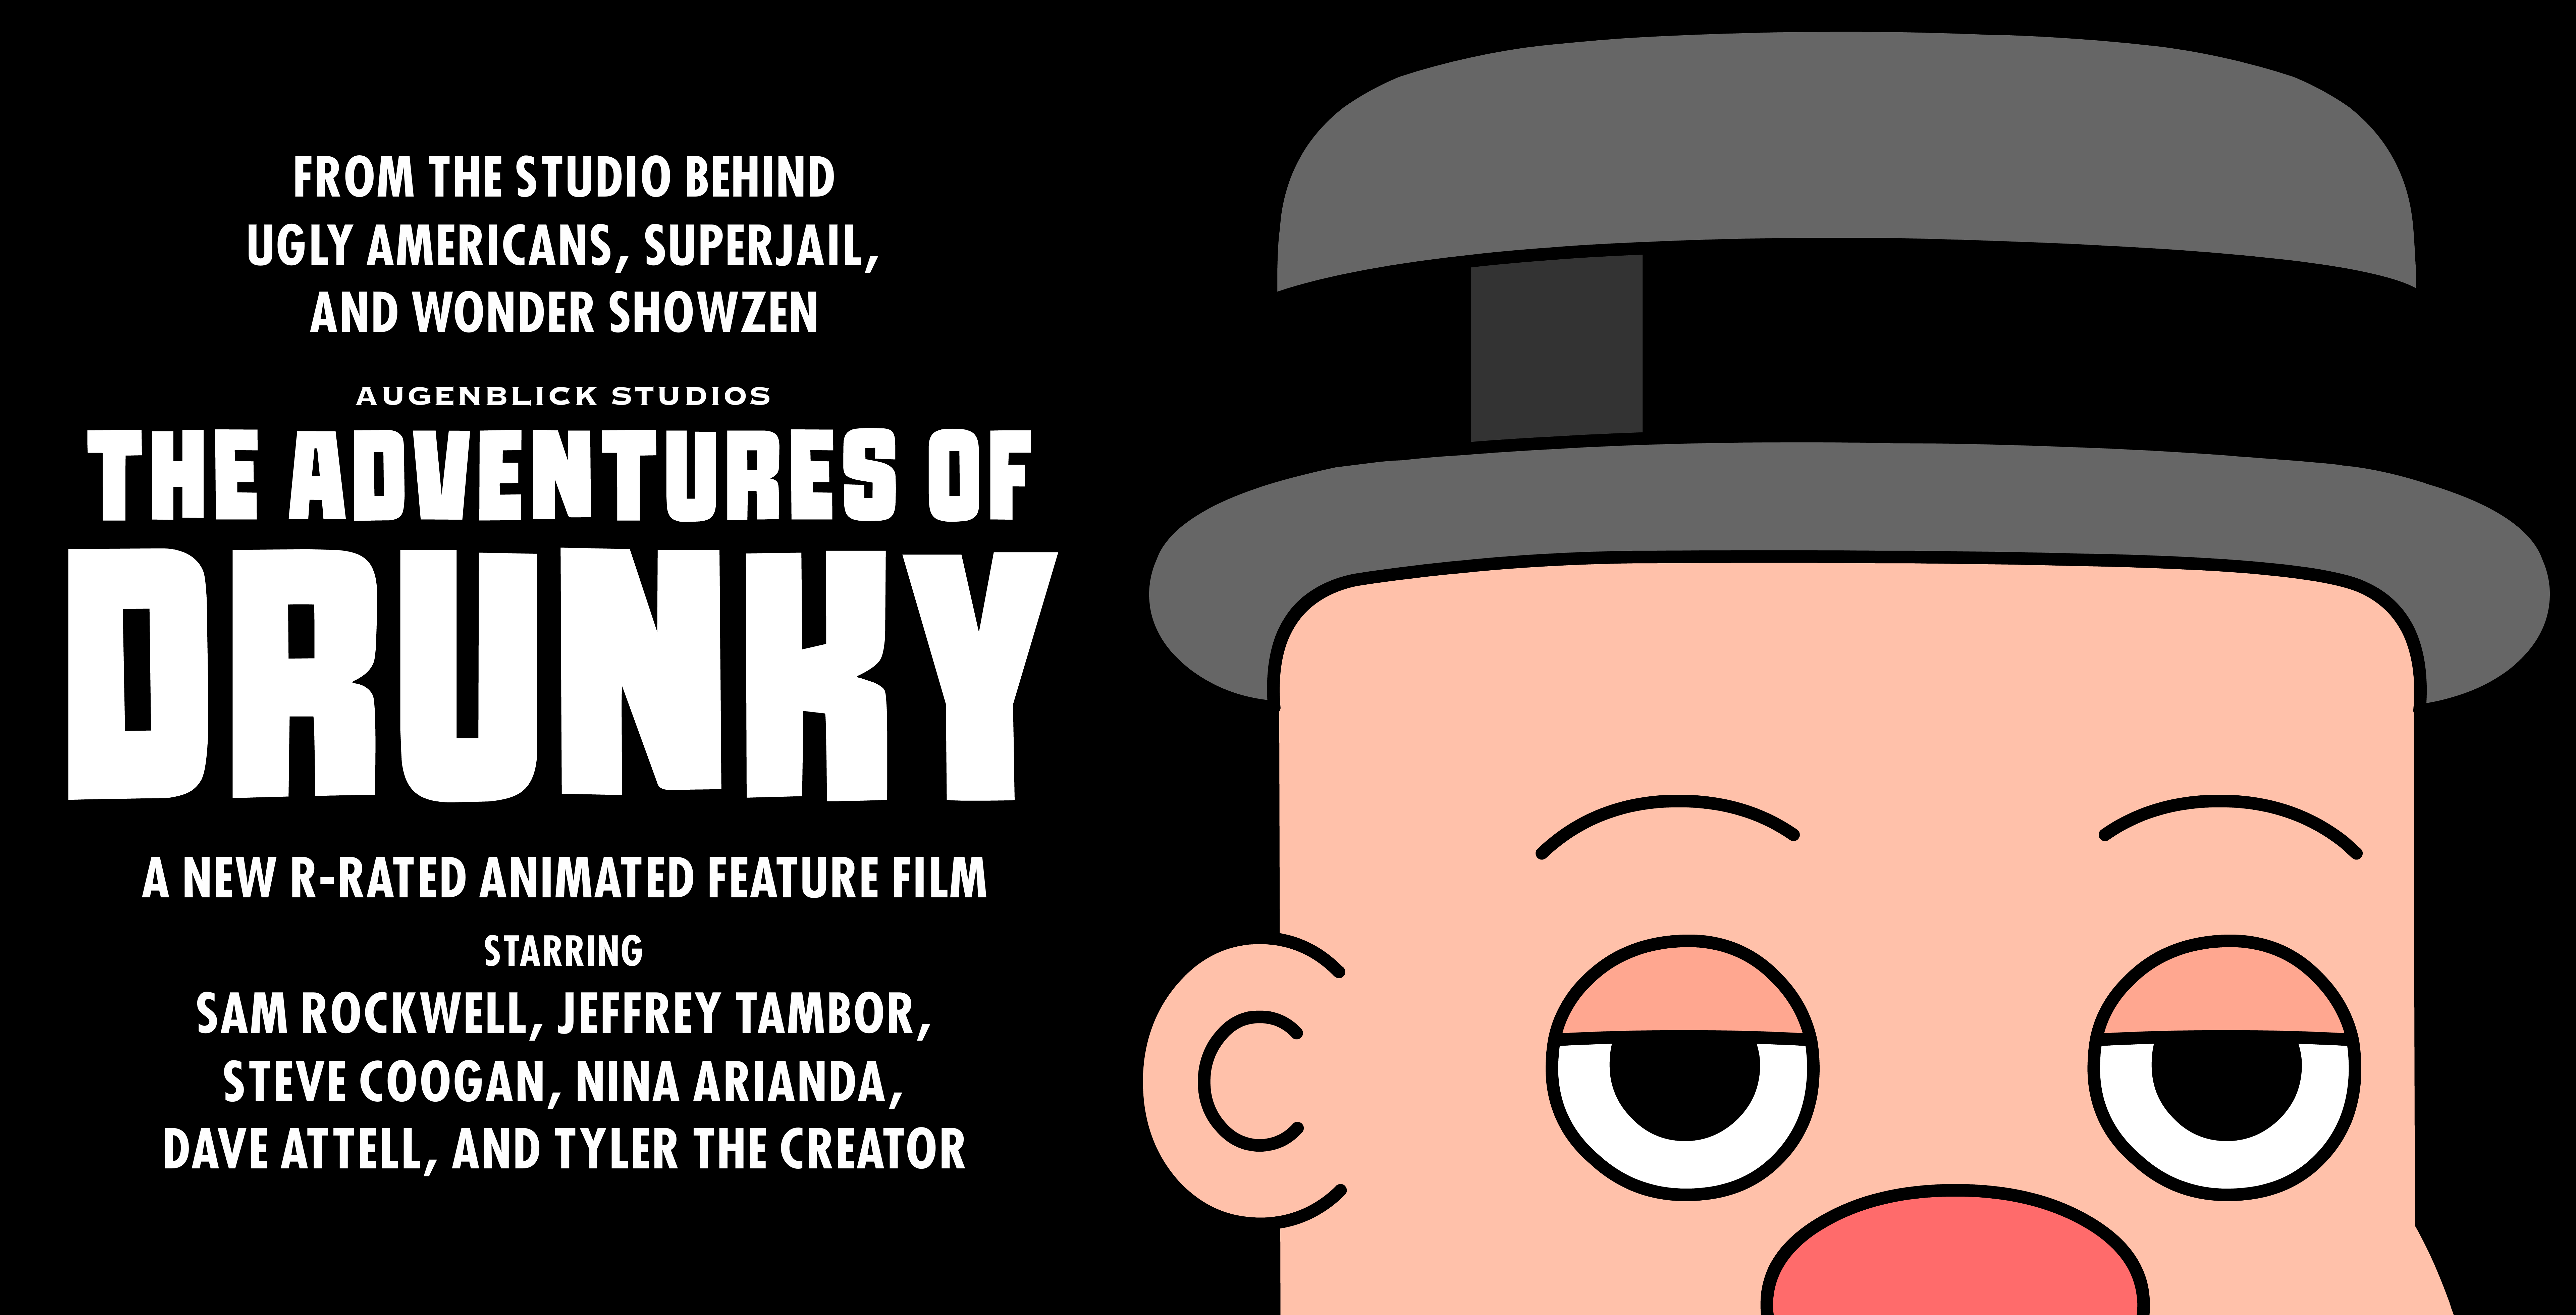 The Adventures Of Drunky Is The R-Rated Animated Comedy We’ve Been Waiting For